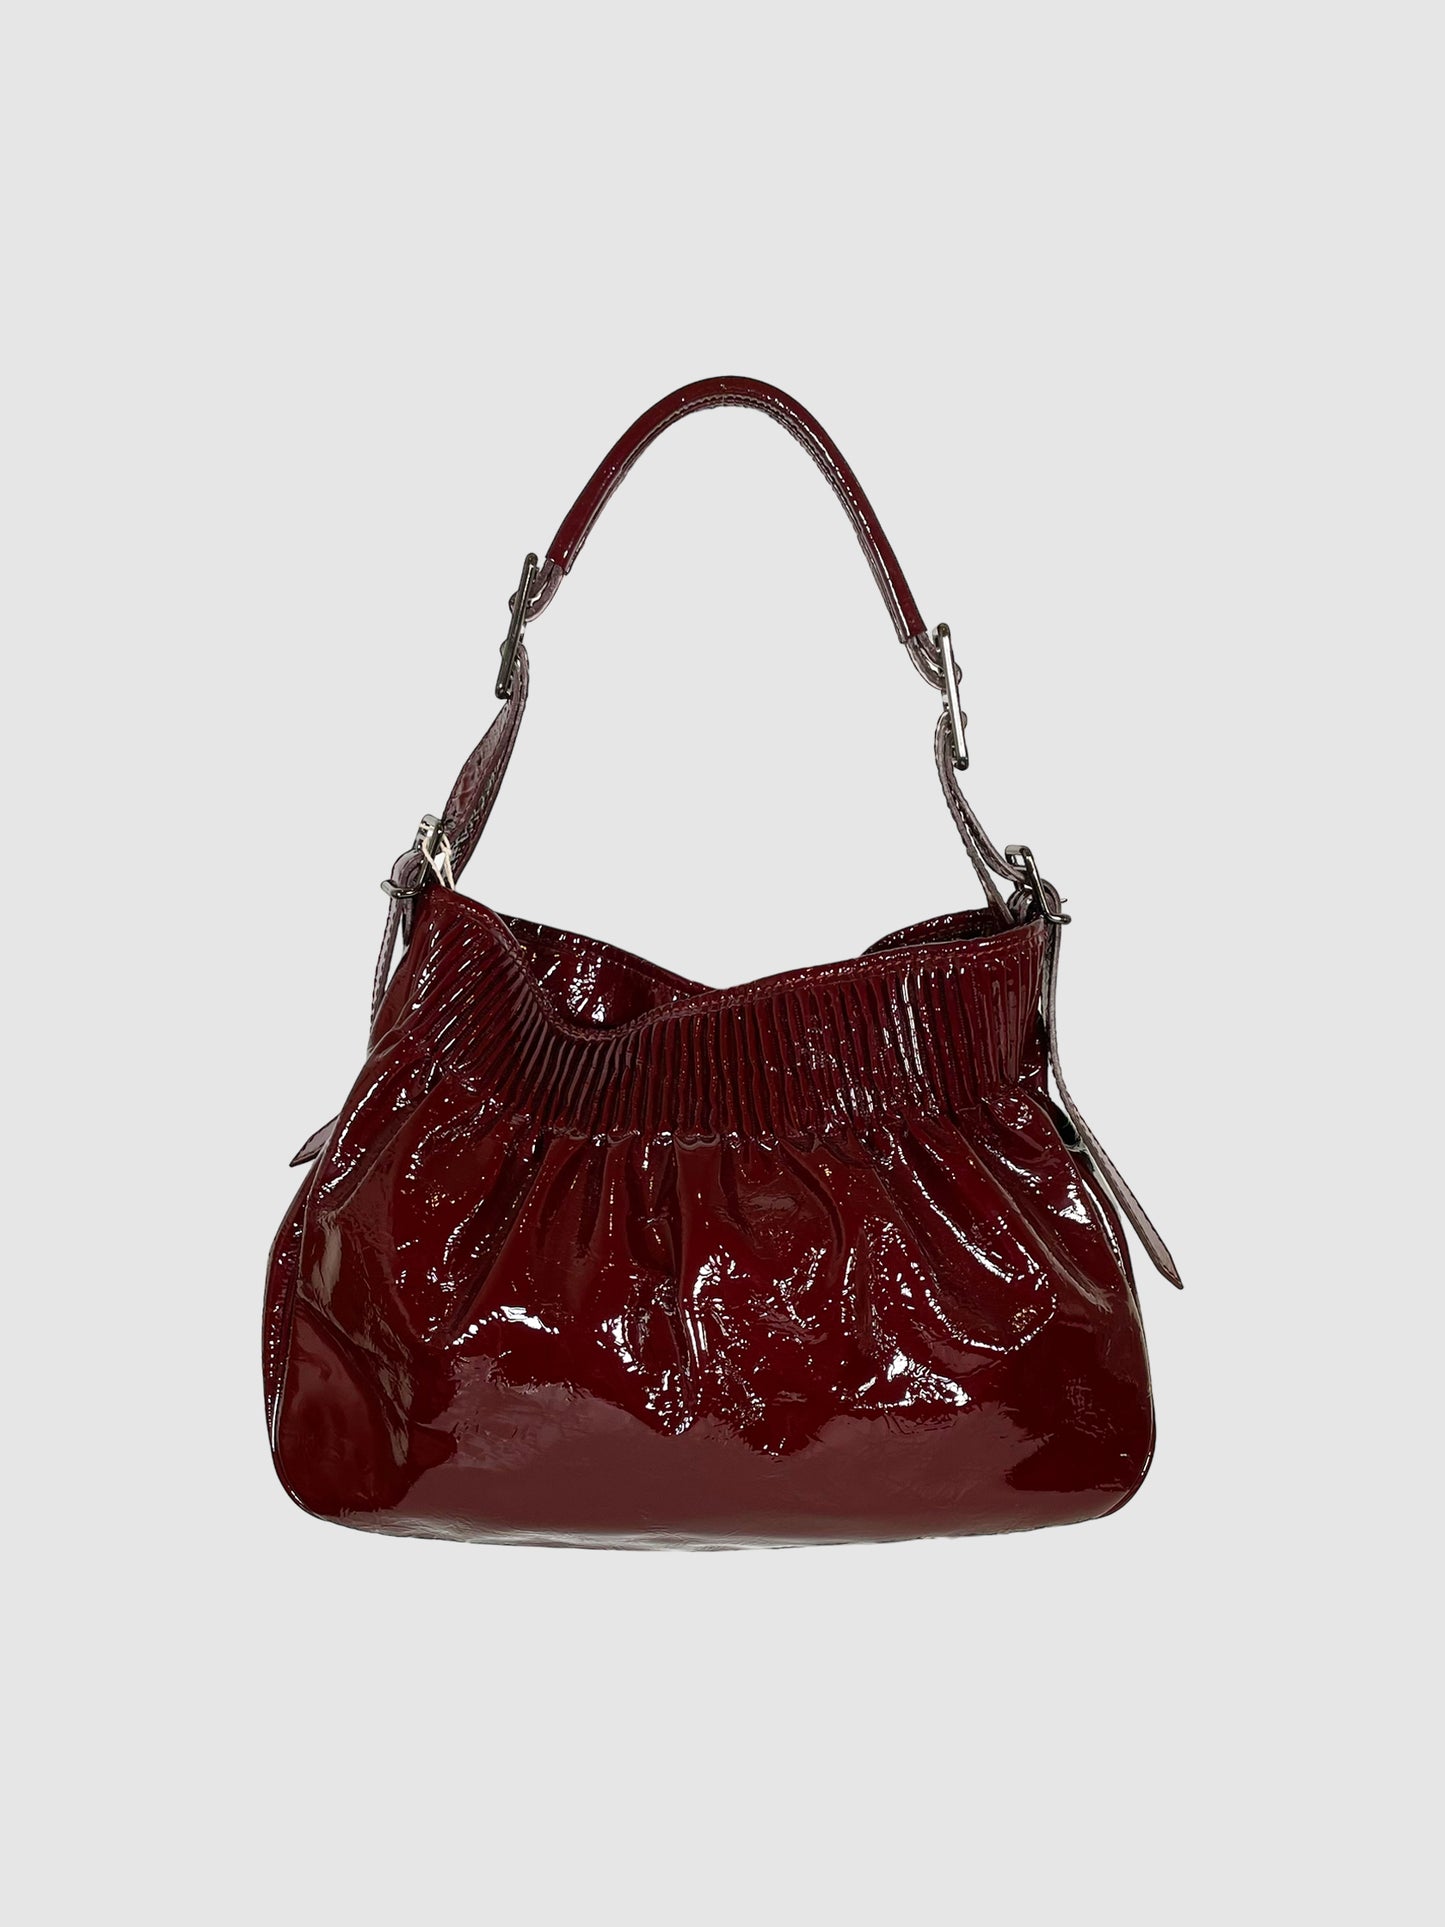 Burberry London Patent Leather Hobo Bag